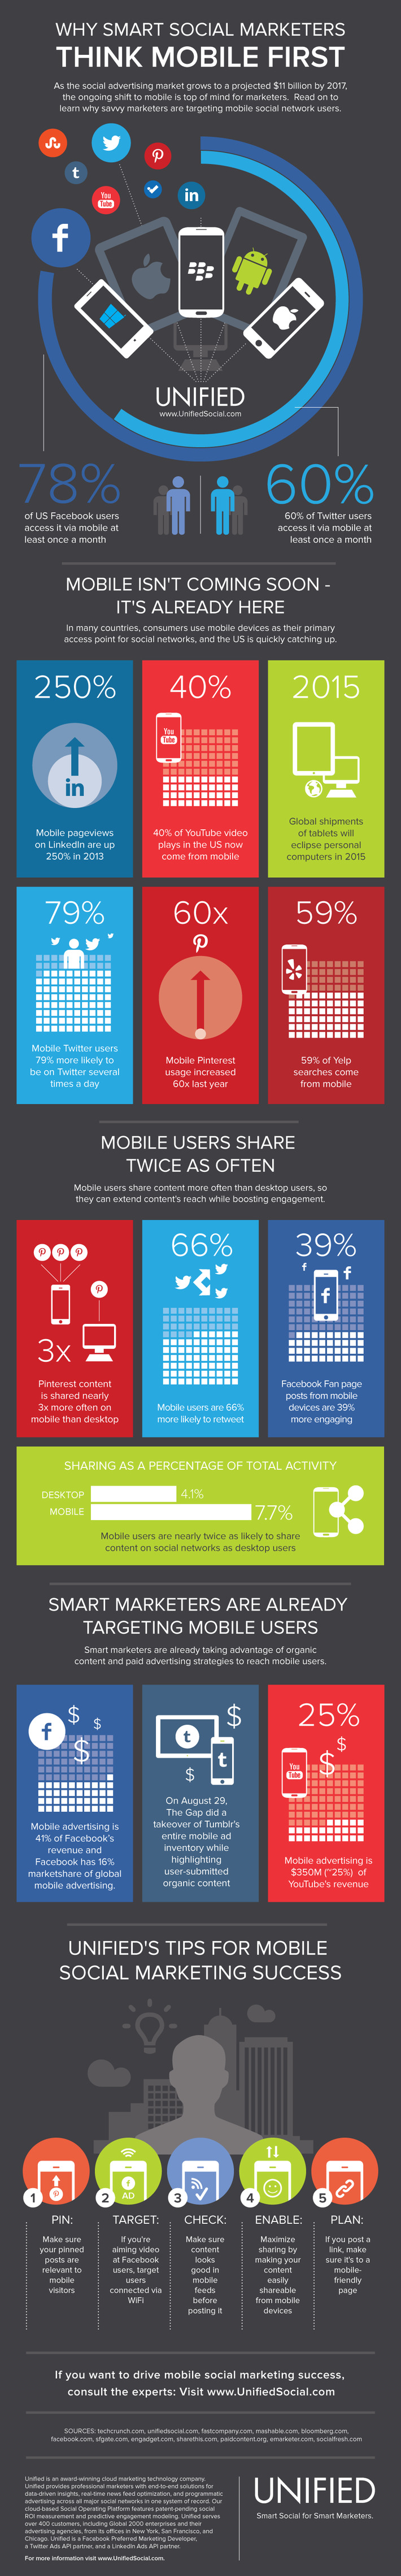 Why Smart Social Marketers Think Mobile First | Digitalisation & Distributeurs | Scoop.it